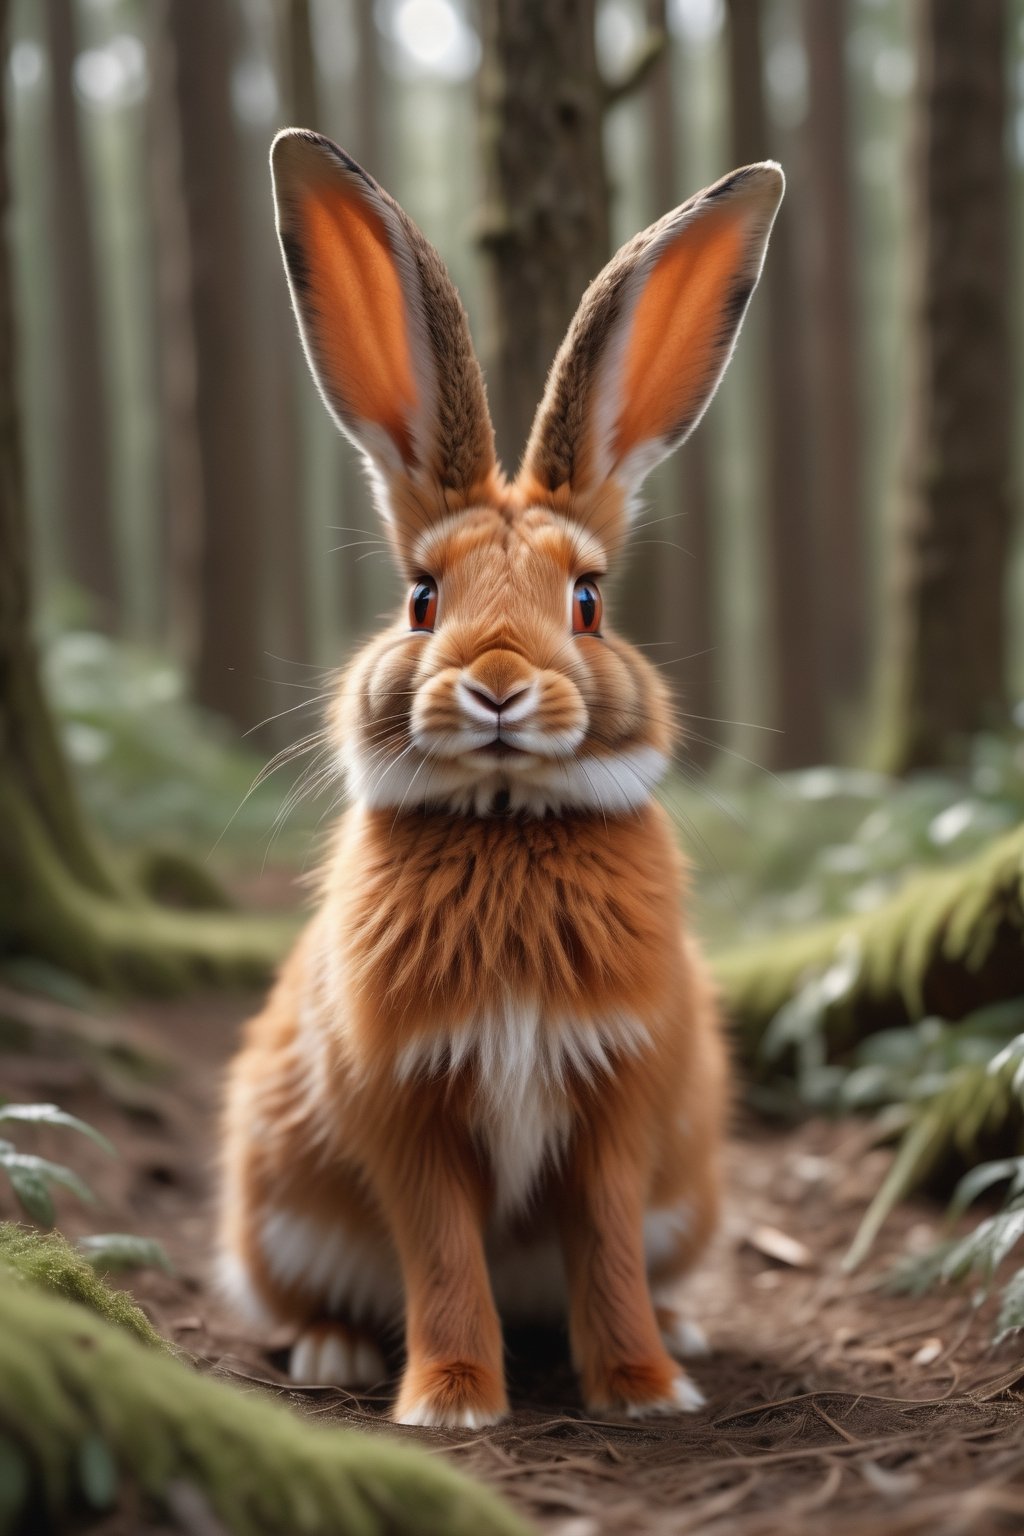 Realistic photo of the red [rabbit : fox with (long rabbit ears:1.8) : 8] in a forest. Soft fur, delicate wool. High quality, UHD, 8k, 4k, detailed, soft light, DSLR quality, stock quality, professional,  BBC world, running